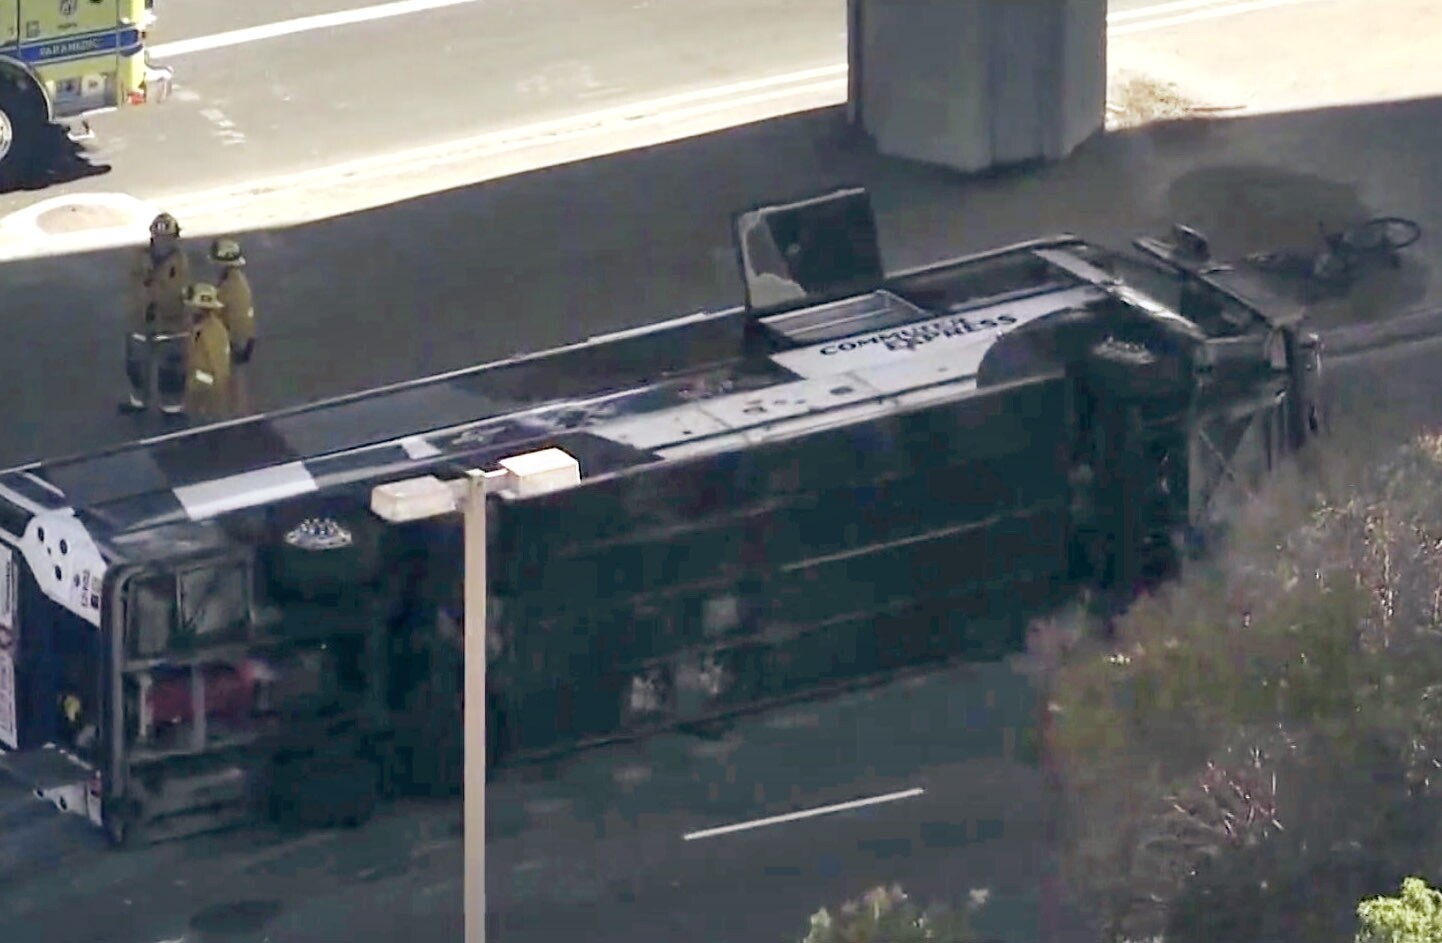 At least 20 injured when an LADOT bus collides with a big rig near LAX